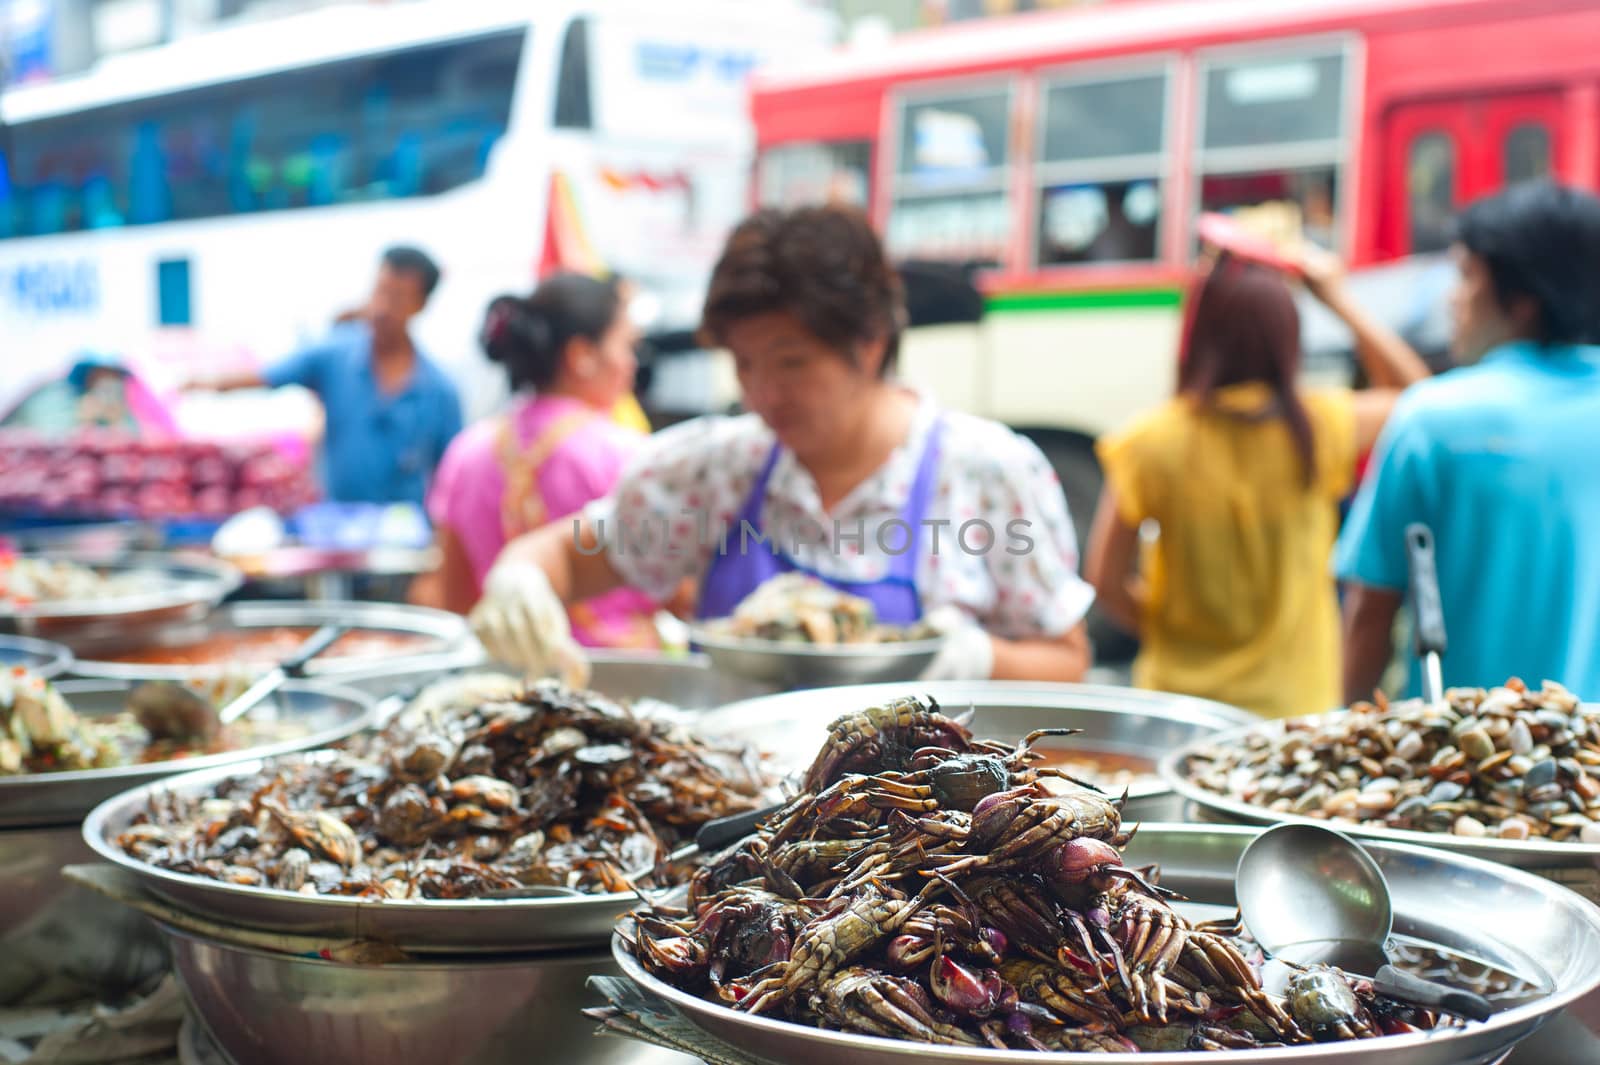 Bangkok, Thailand - March 04, 2013: Food stall on the street in Bangkok, Thailand. According gov stats there are over 16,000 registered street vendors in Bangkok.